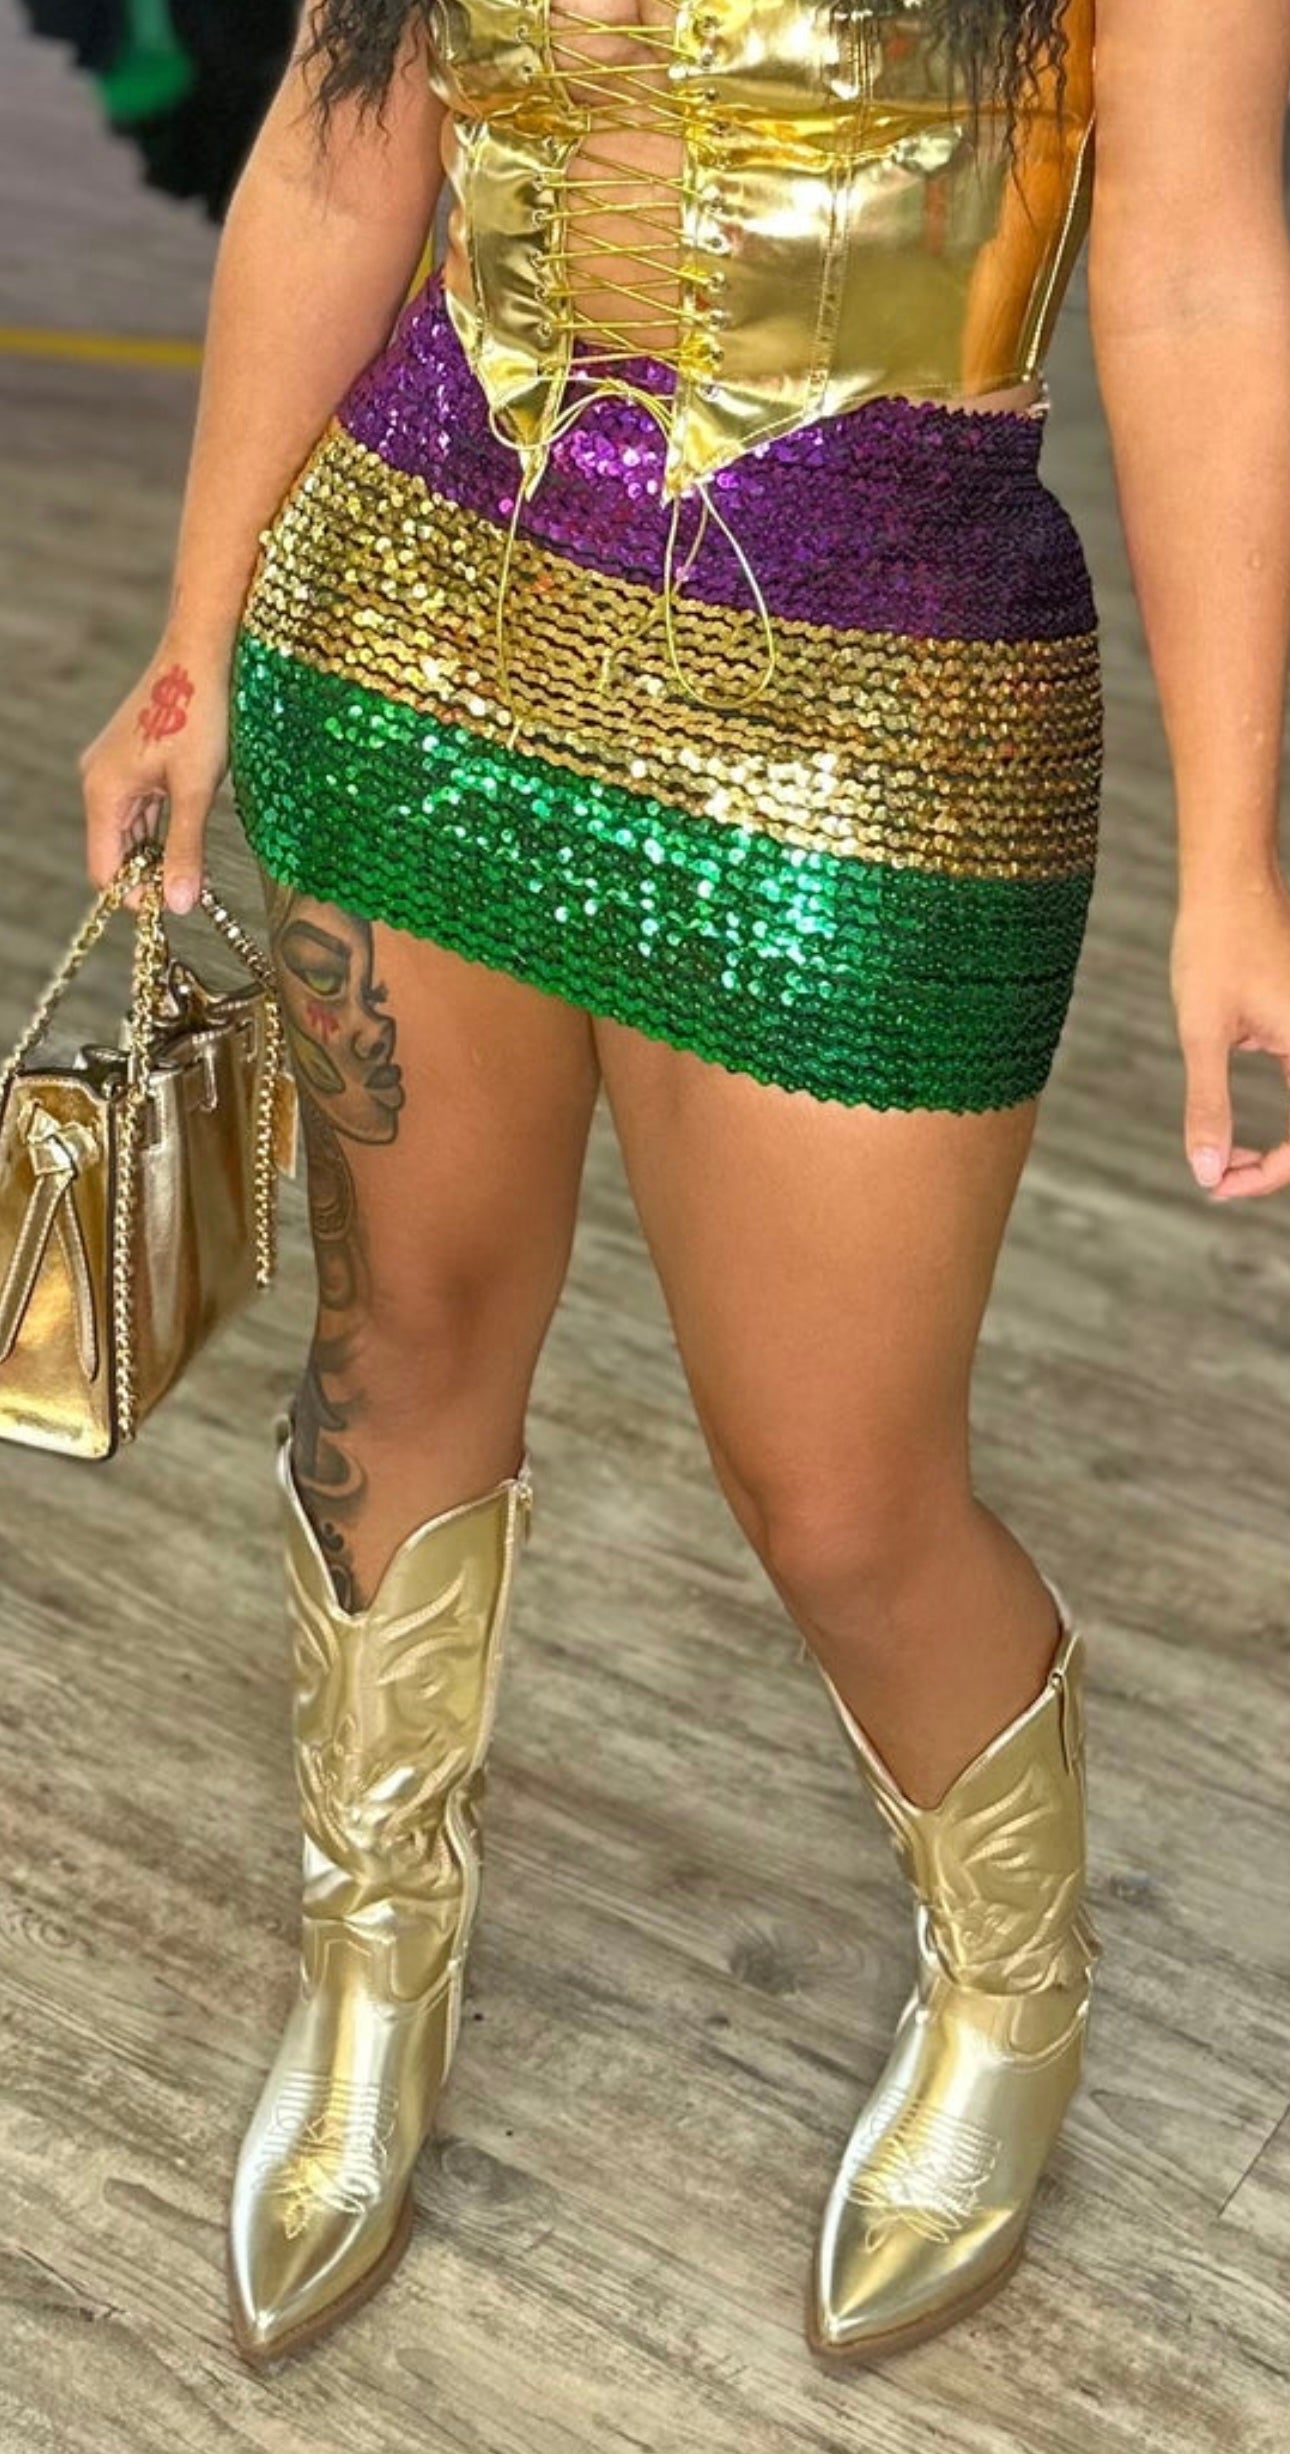 Gold rodeo boots